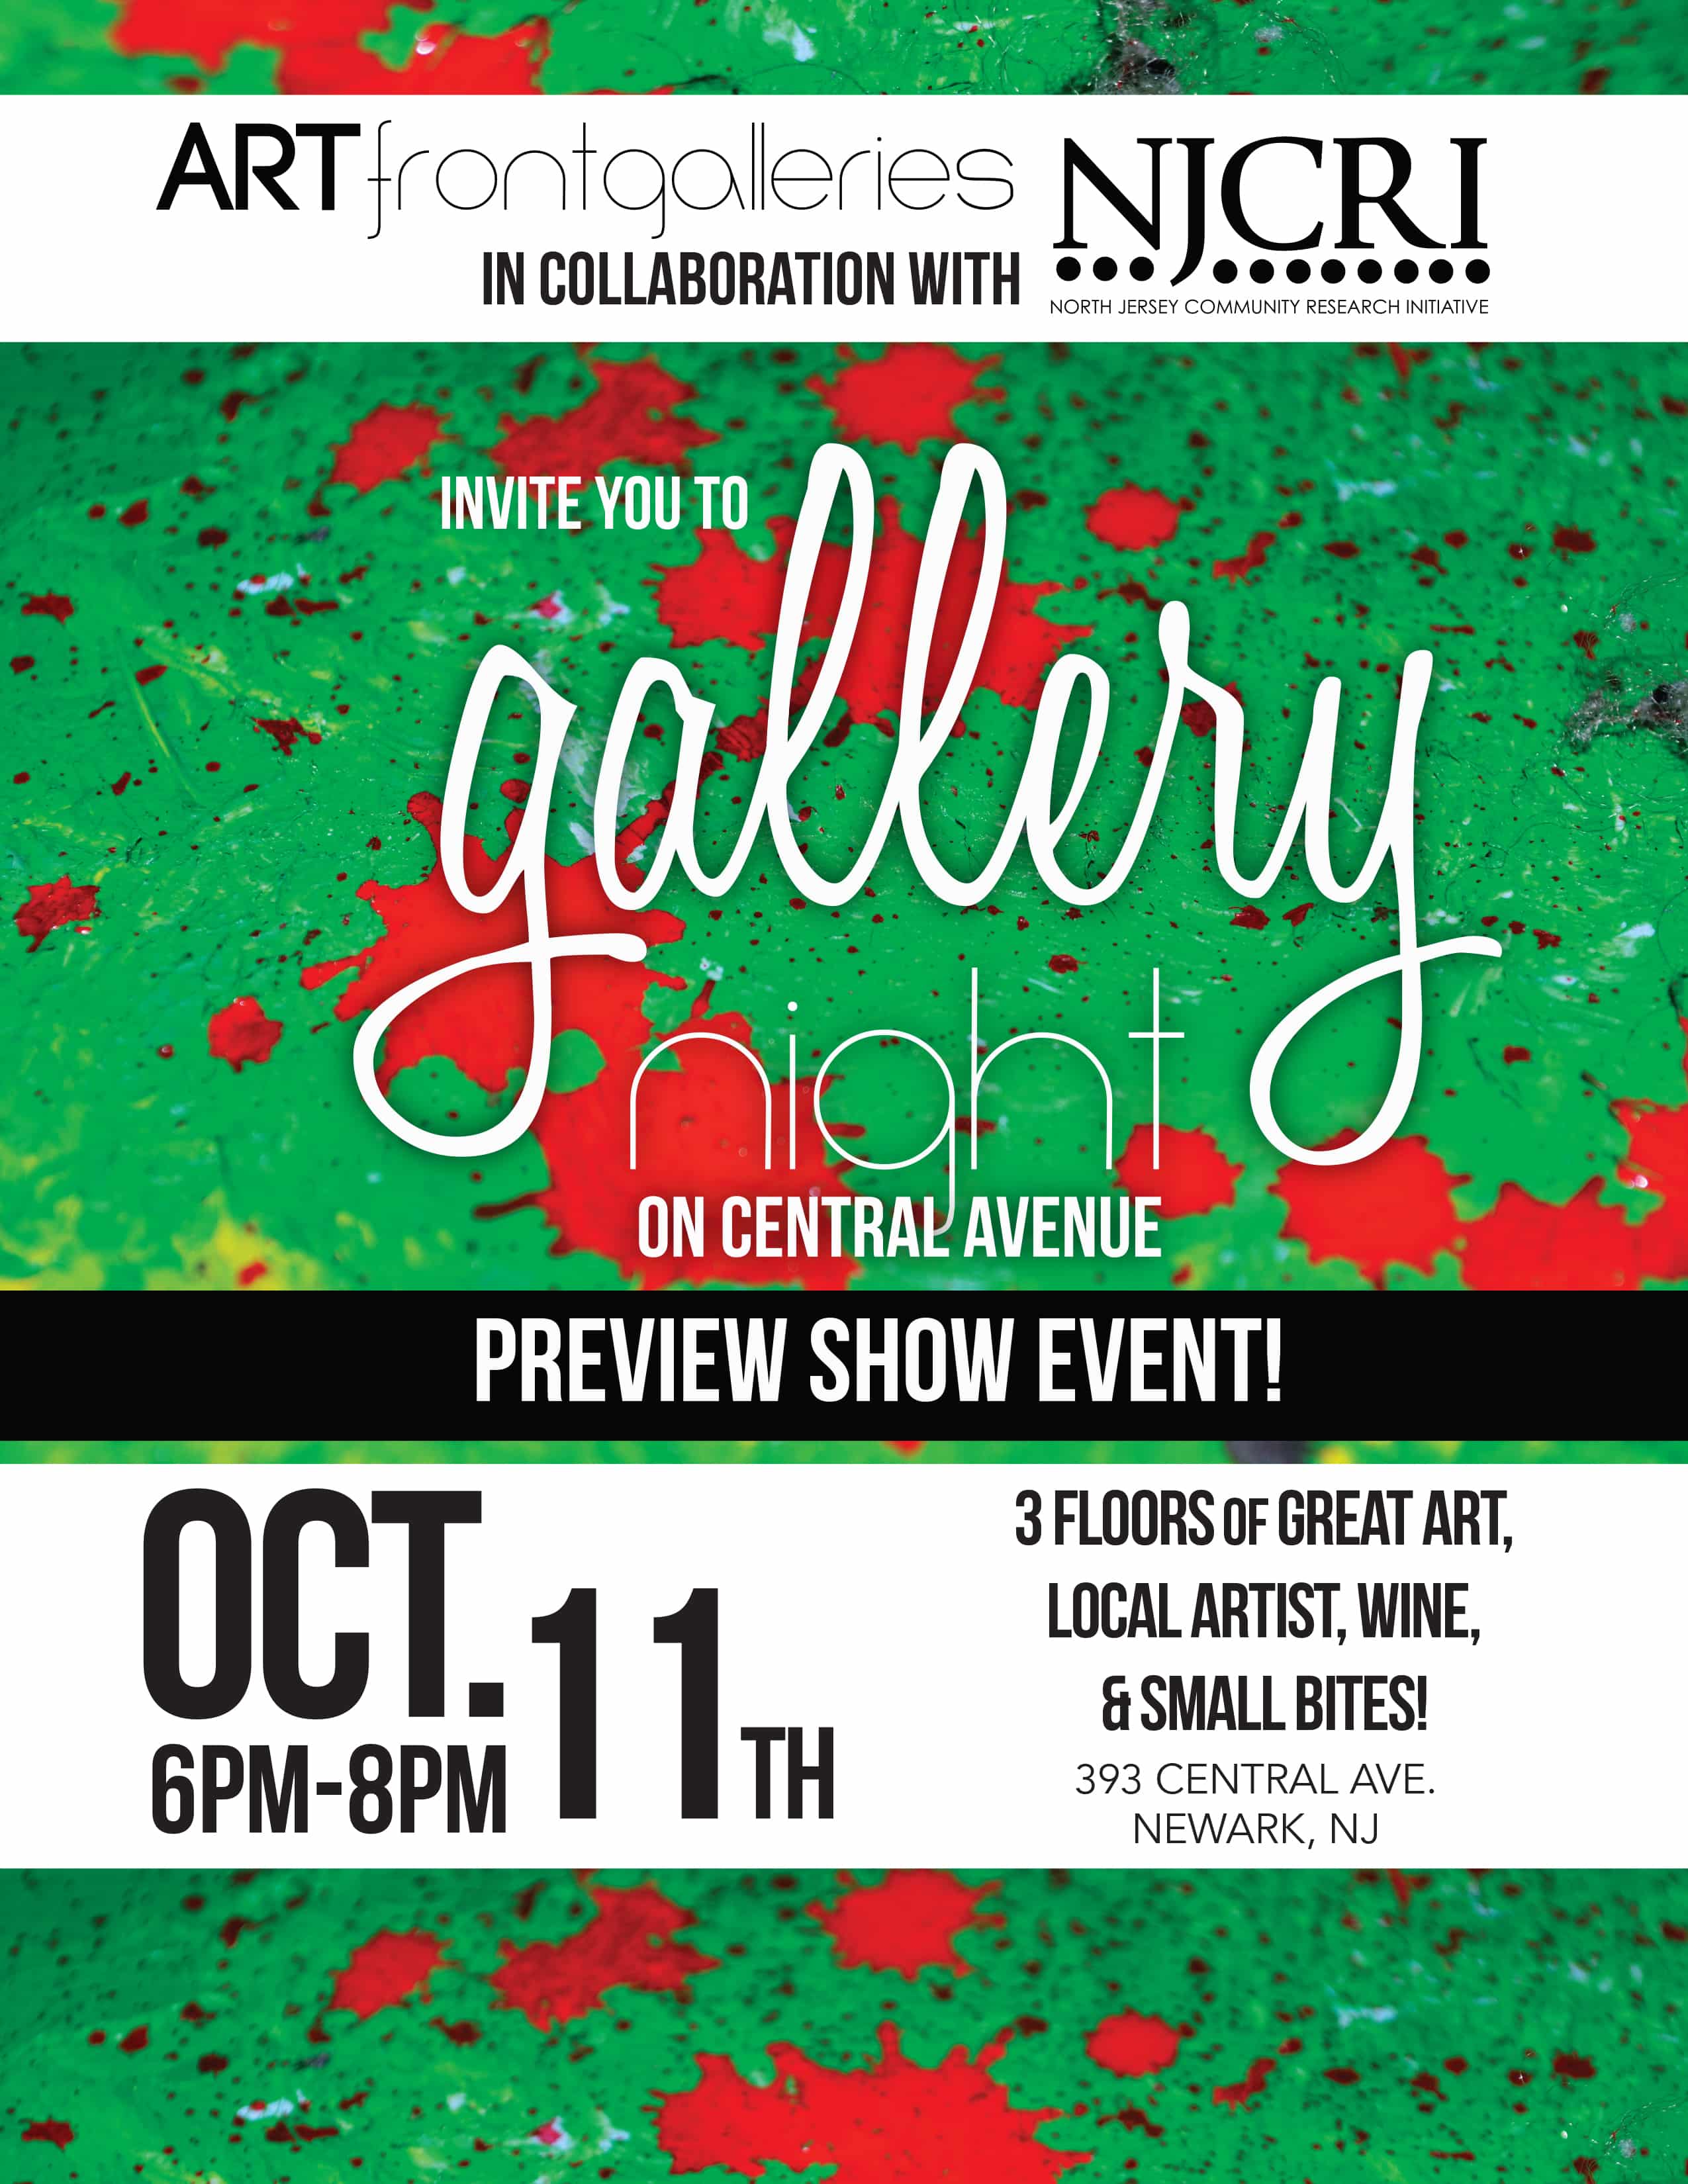 gallery night in collaboration with NJCRI